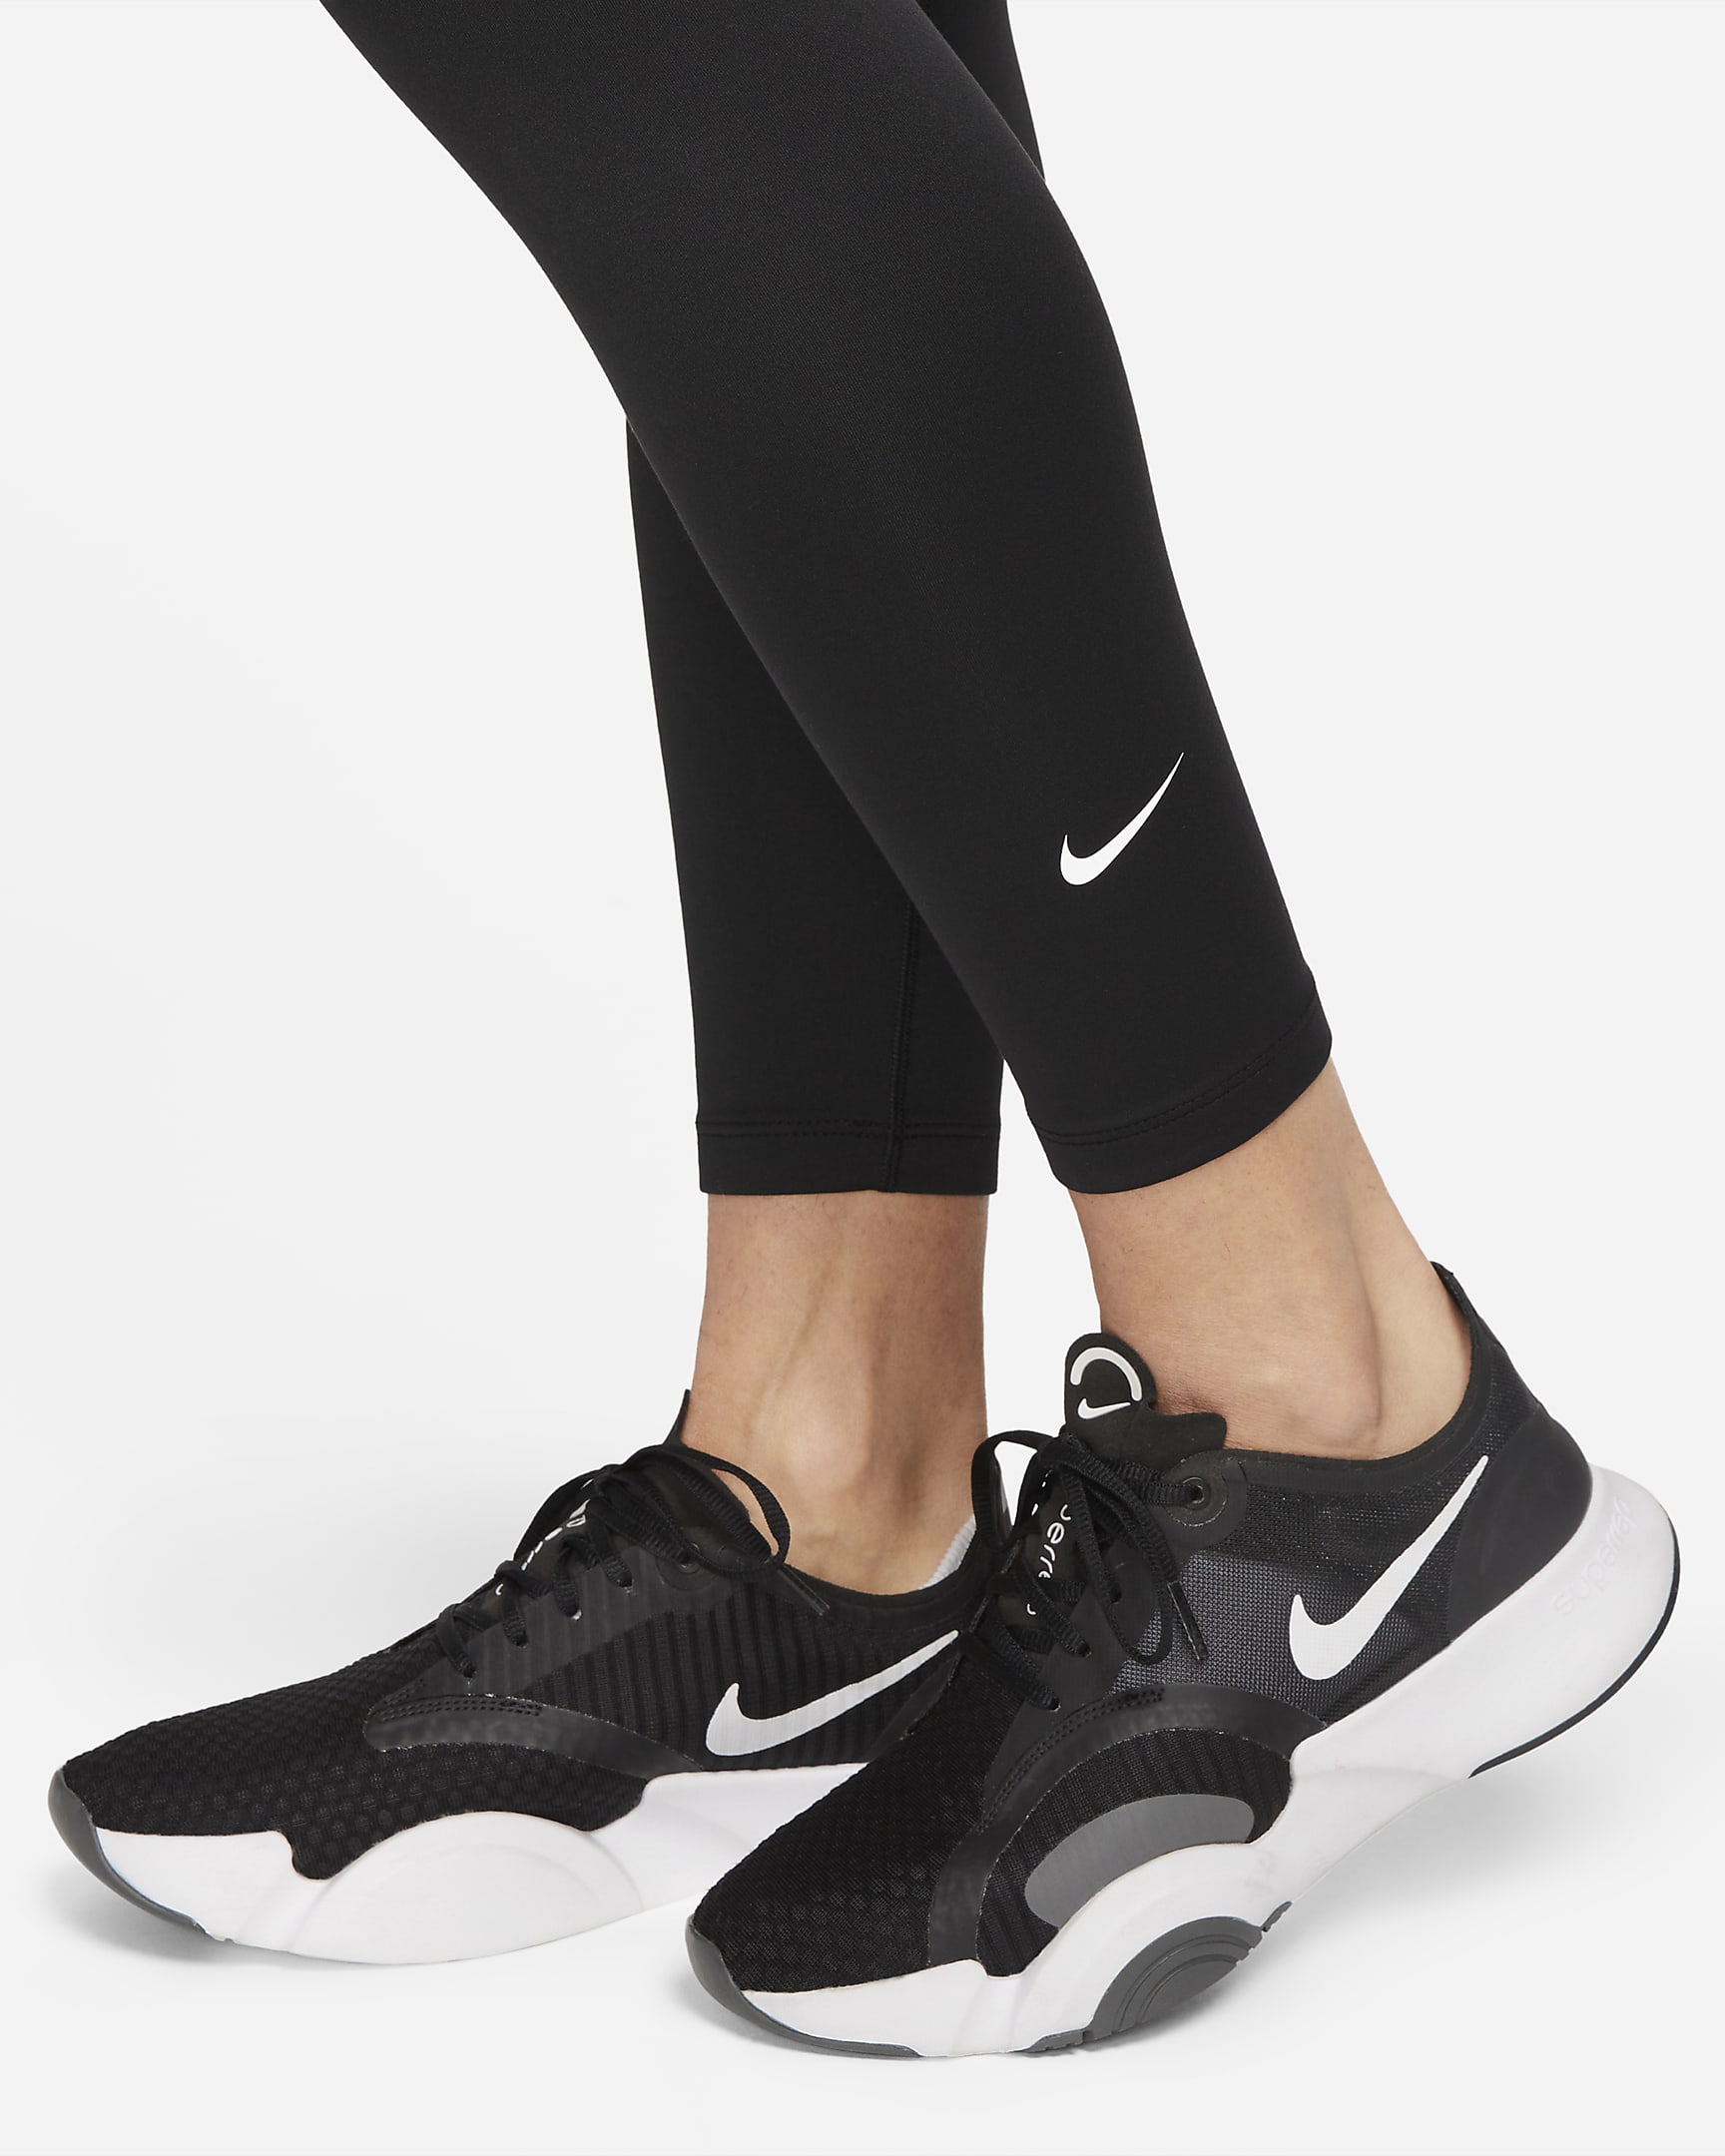 Nike Therma-FIT One Women's High-Waisted 7/8 Leggings - Black/White